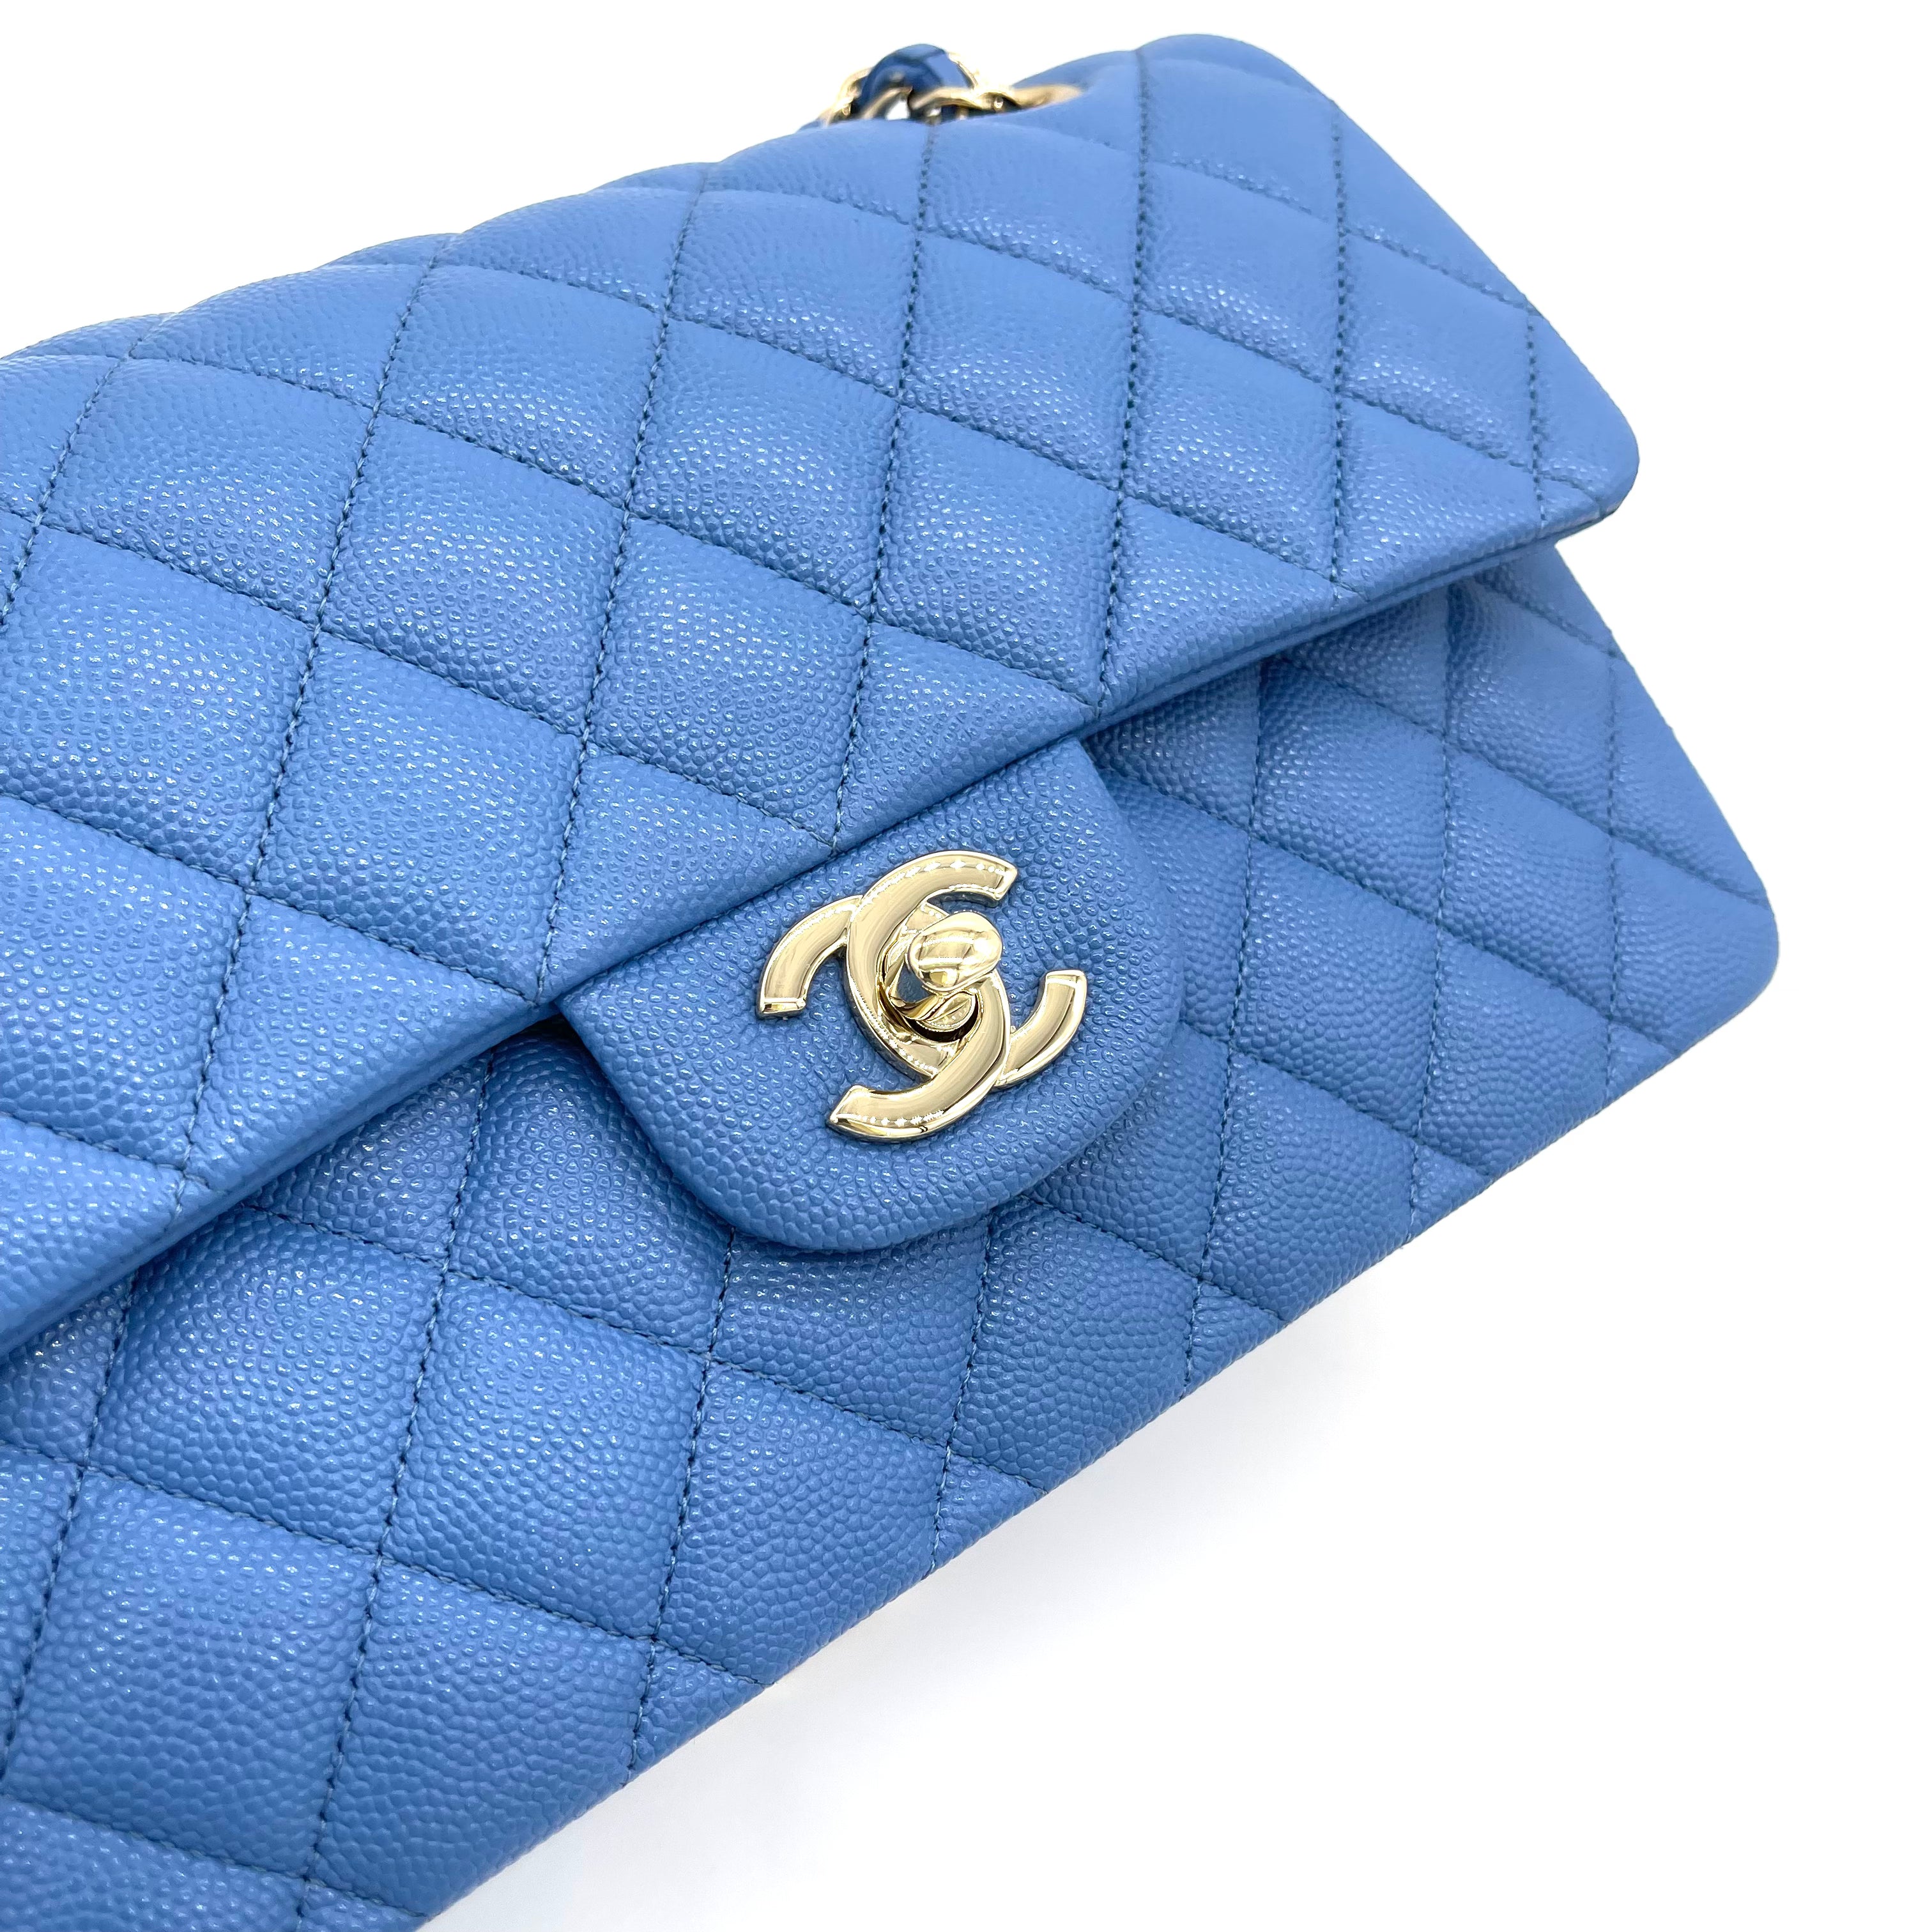 Light Blue Quilted Caviar Leather Small Classic Double Flap Bag